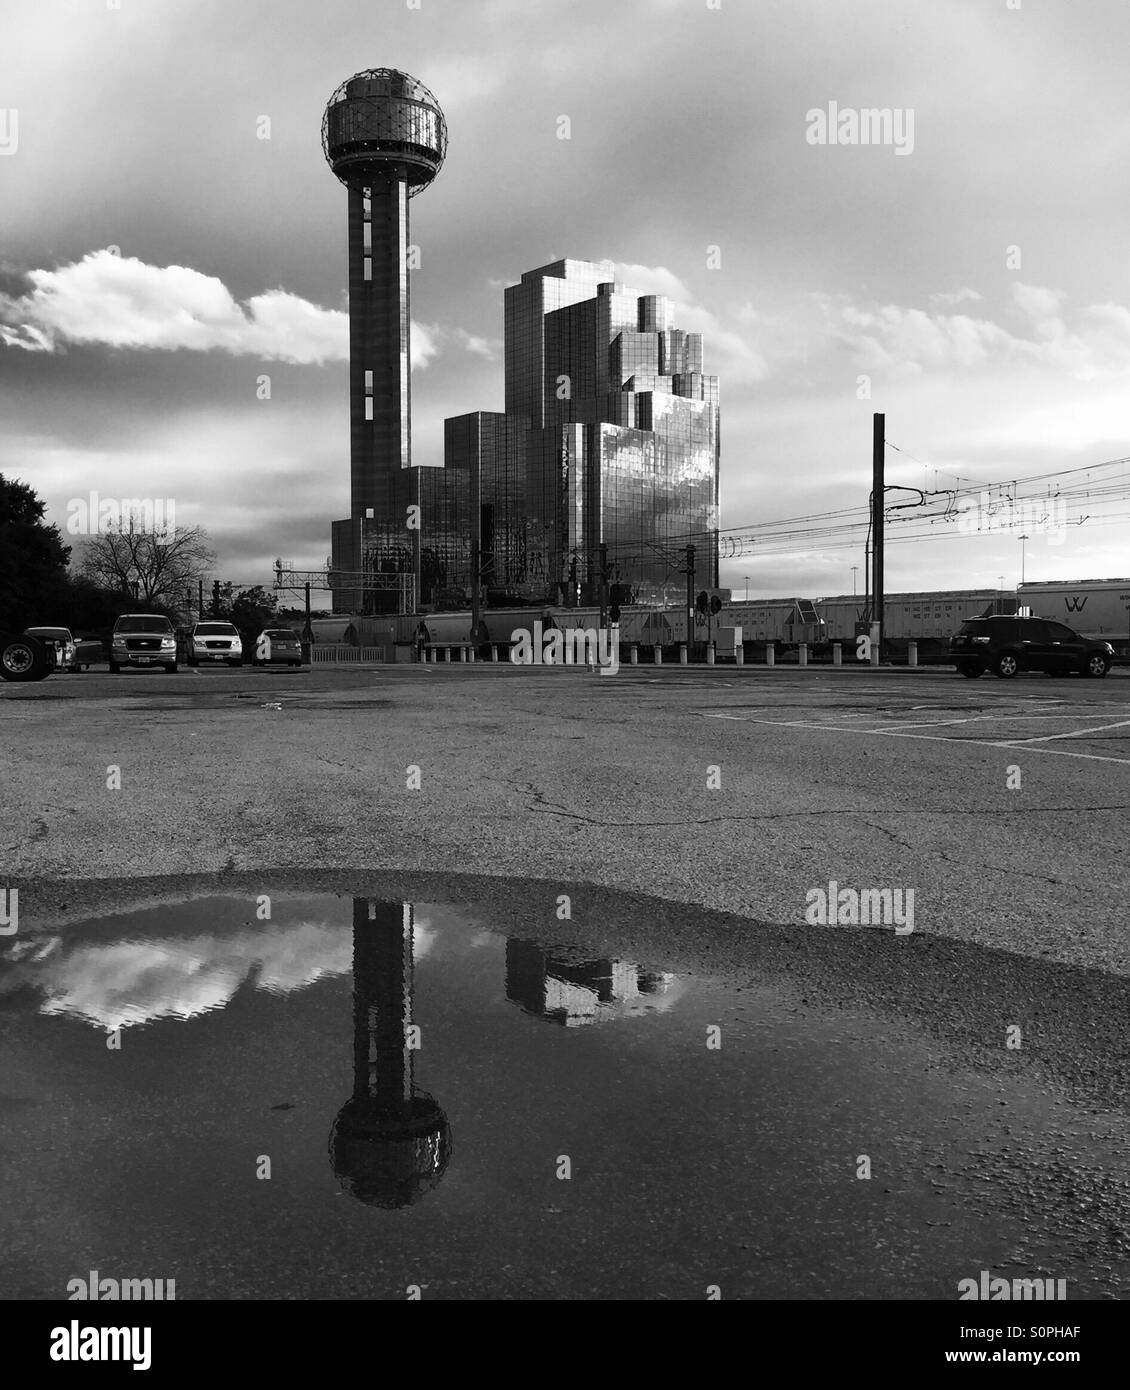 Dallas Black and White Pictures | Black and White blurry downtown ...